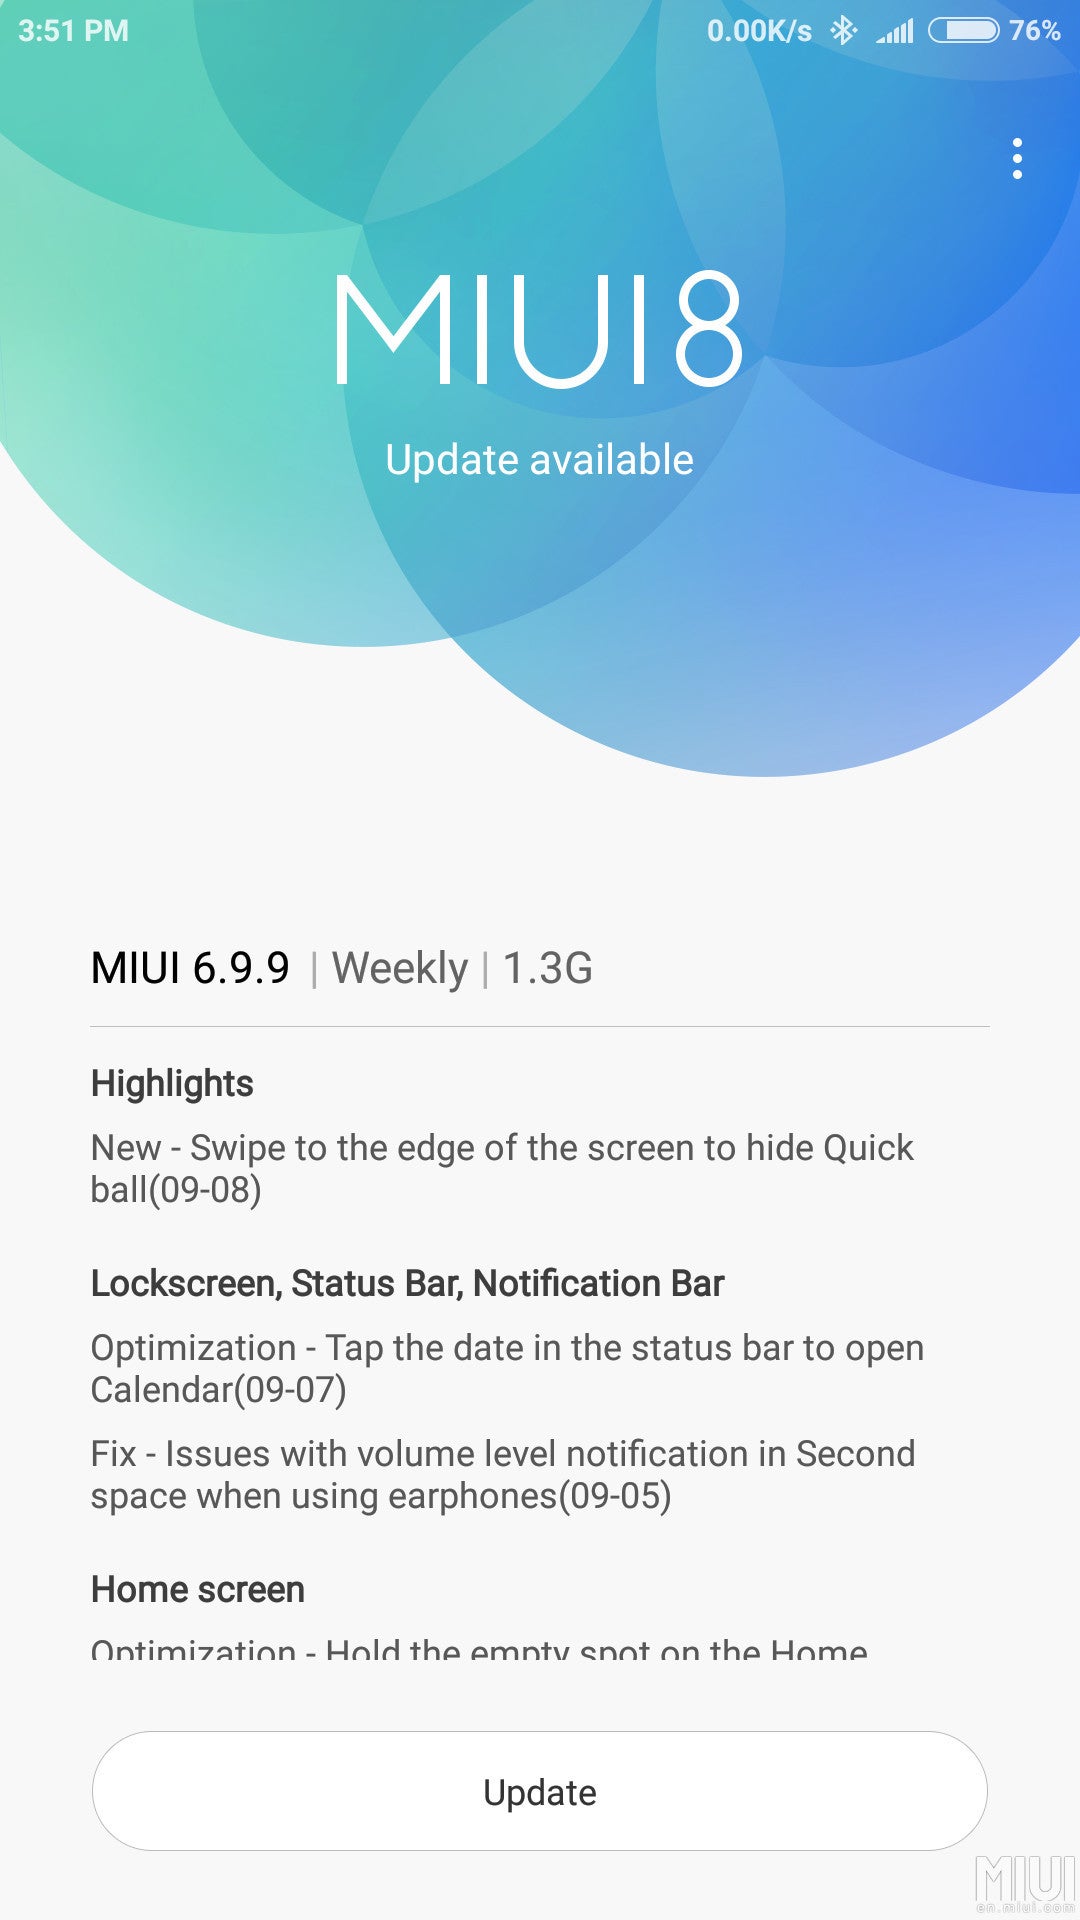 Xiaomi releases MIUI 8.0 Global Beta ROM 6.9.9 for Redmi Note 3 Snapdragon Edition